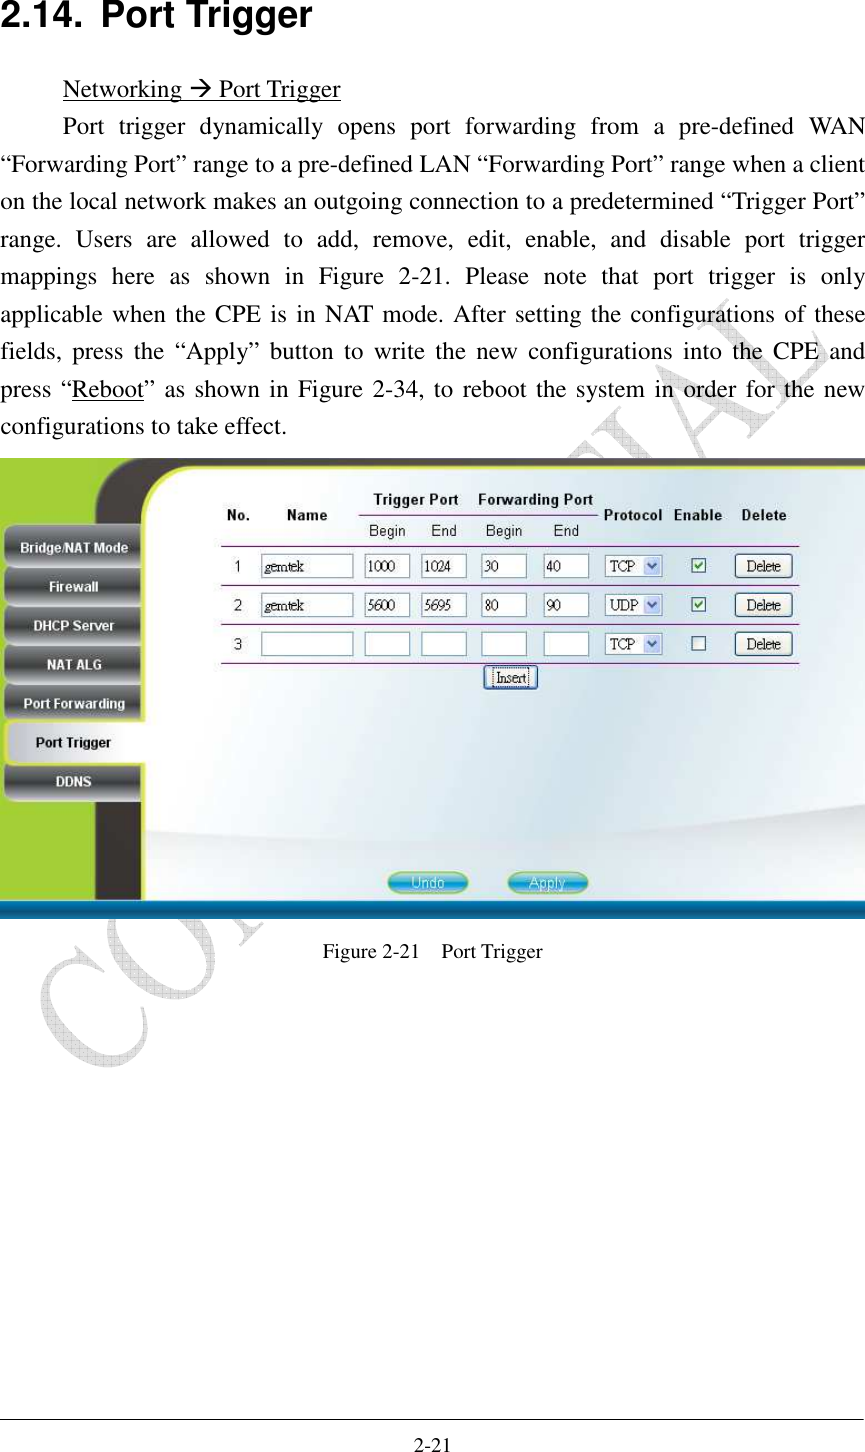    2-21 2.14.  Port Trigger Networking  Port Trigger Port  trigger  dynamically  opens  port  forwarding  from  a  pre-defined  WAN “Forwarding Port” range to a pre-defined LAN “Forwarding Port” range when a client on the local network makes an outgoing connection to a predetermined “Trigger Port” range.  Users  are  allowed  to  add,  remove,  edit,  enable,  and  disable  port  trigger mappings  here  as  shown  in  Figure  2-21.  Please  note  that  port  trigger  is  only applicable when the CPE is in NAT mode. After setting the configurations of these fields,  press  the  “Apply”  button  to write  the  new  configurations  into  the  CPE  and press “Reboot” as shown in Figure 2-34, to reboot the system in order for the new configurations to take effect.  Figure 2-21    Port Trigger  